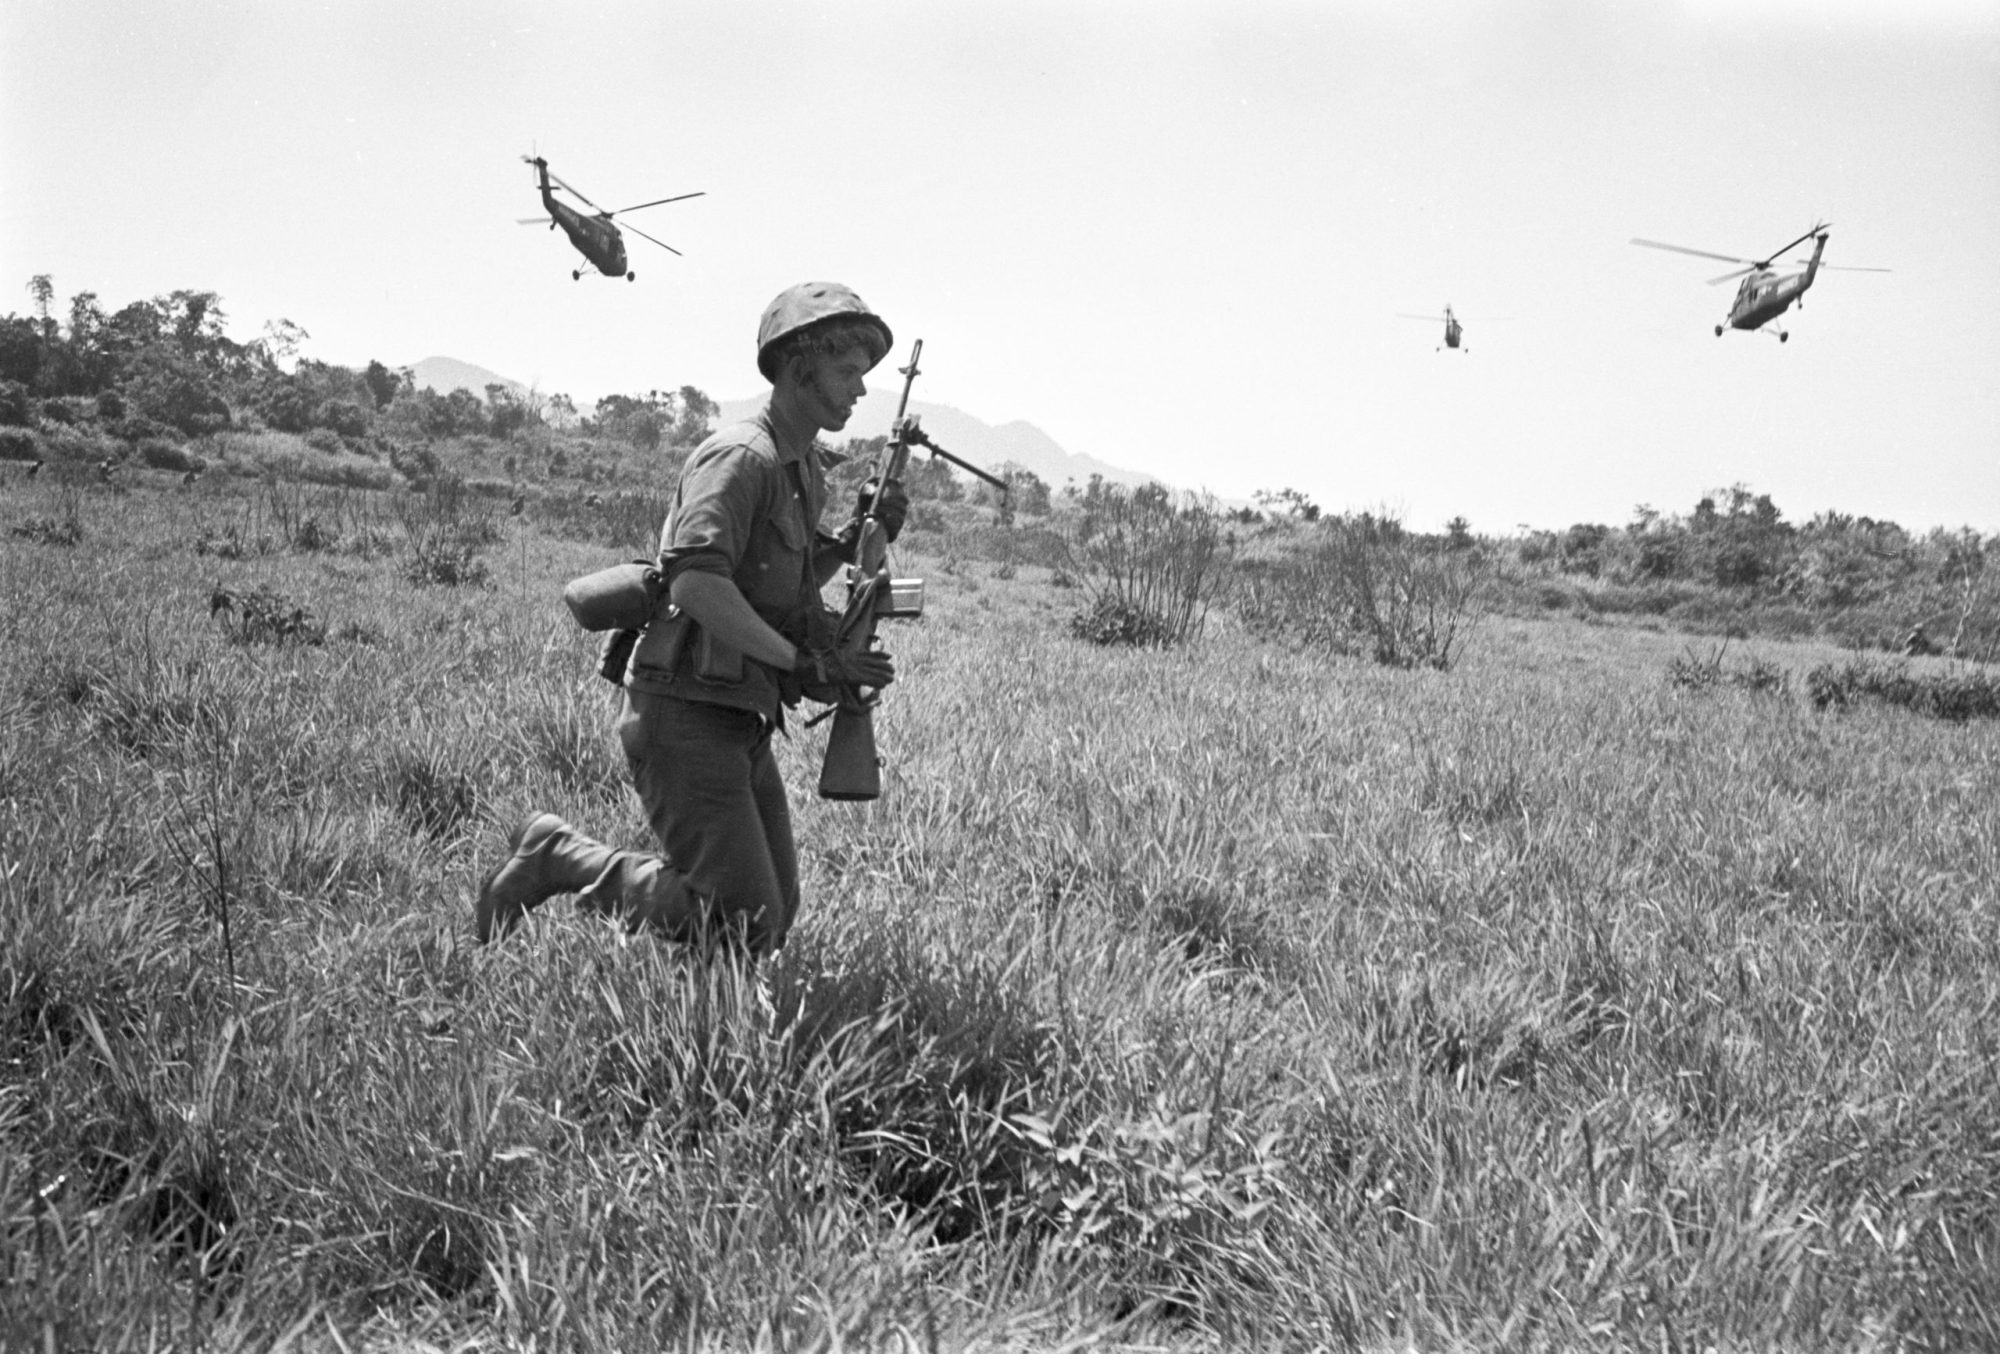 An American soldier dropped from a helicopter for a reconnaissance mission near the city of Da Nang on April 30, 1965, Vietnam. Photo by REPORTERS ASSOCIES/Gamma-Rapho via Getty Images